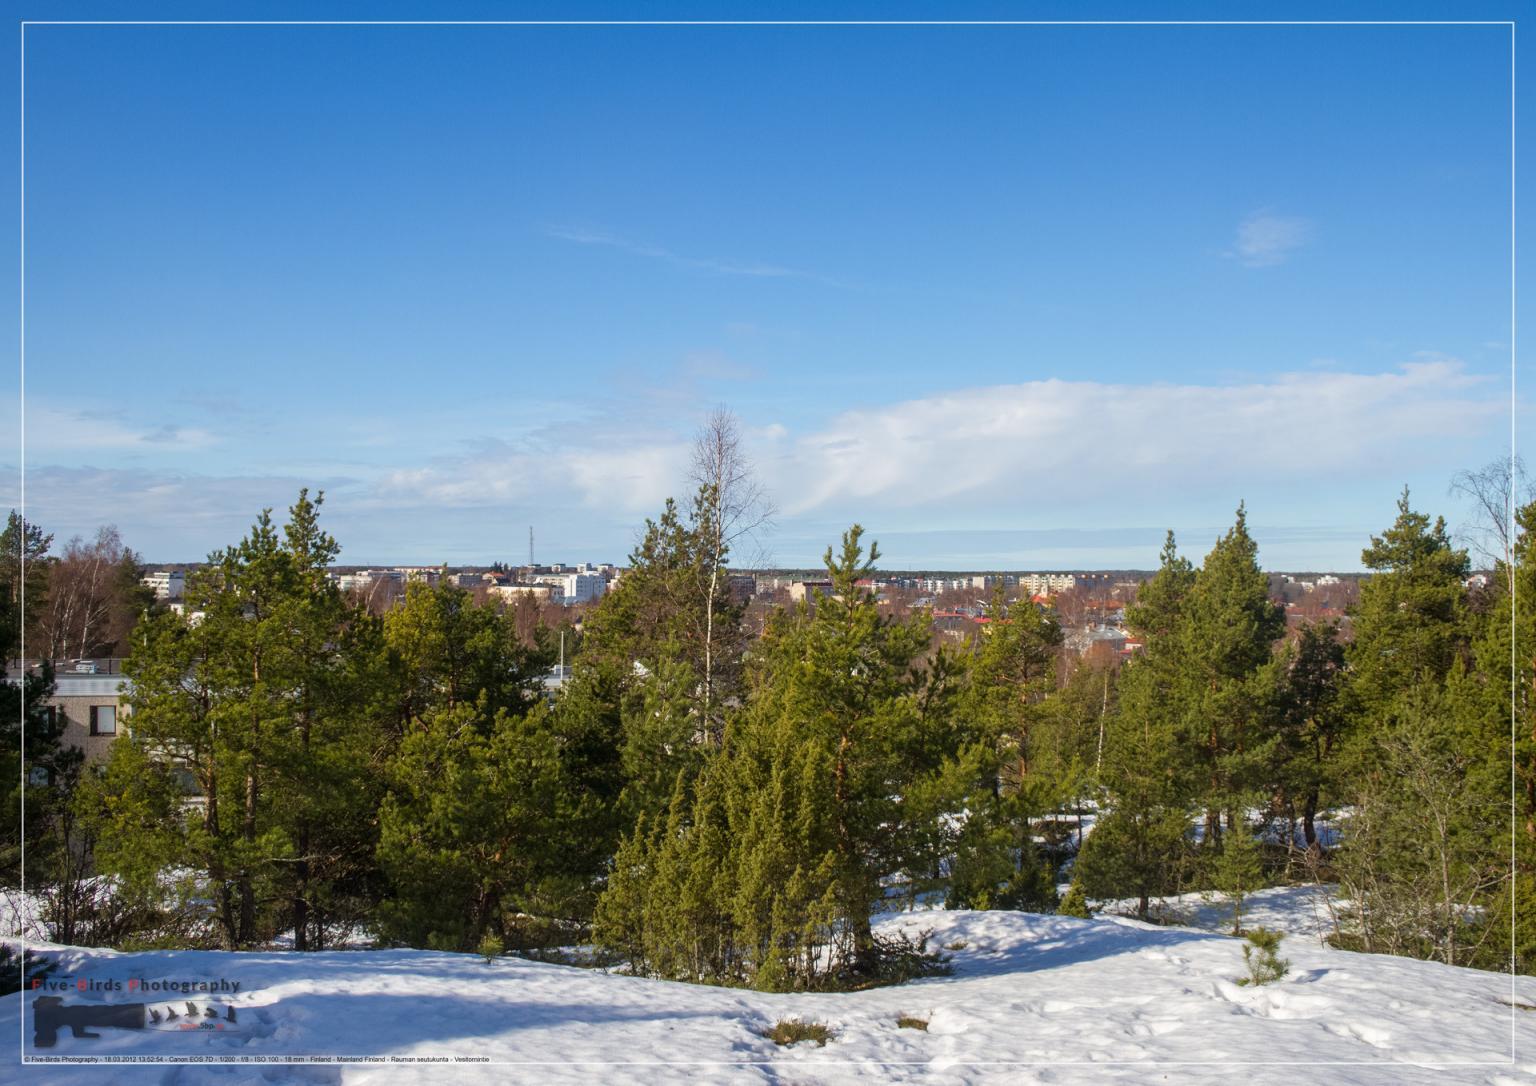 View over the Finnish city of Rauma from the lookout tower Rauma